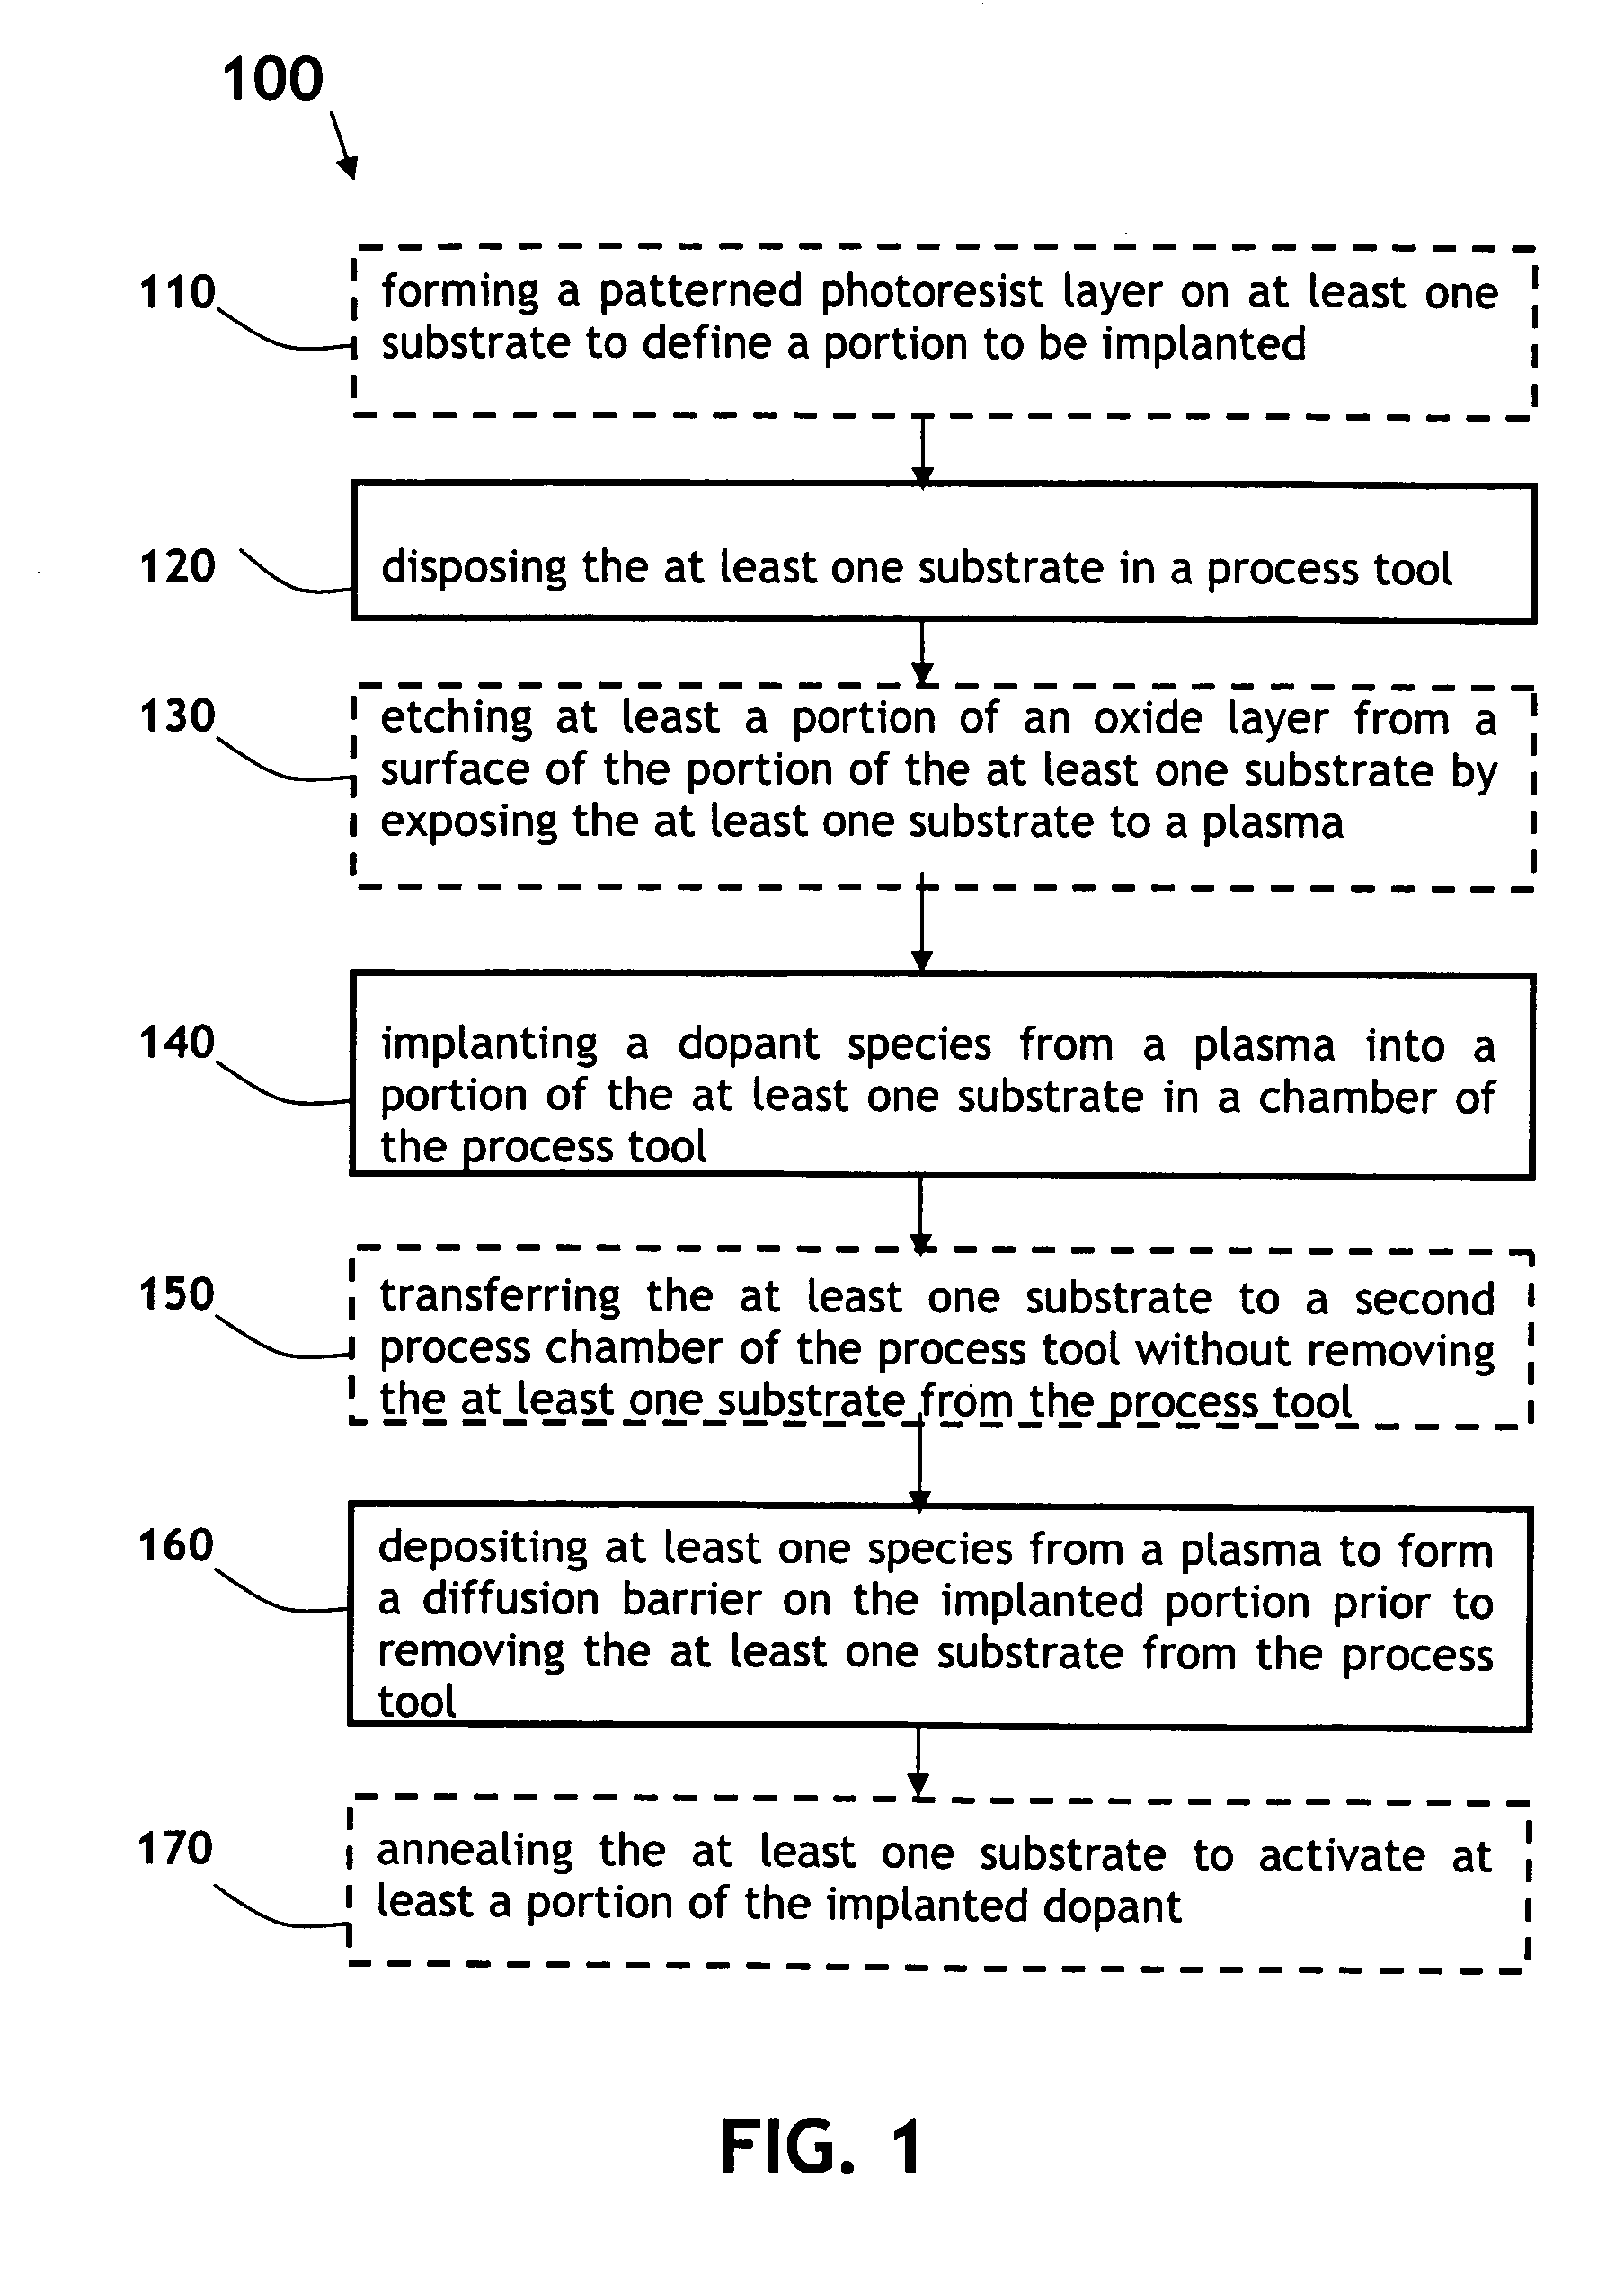 Shallow-junction fabrication in semiconductor devices via plasma implantation and deposition